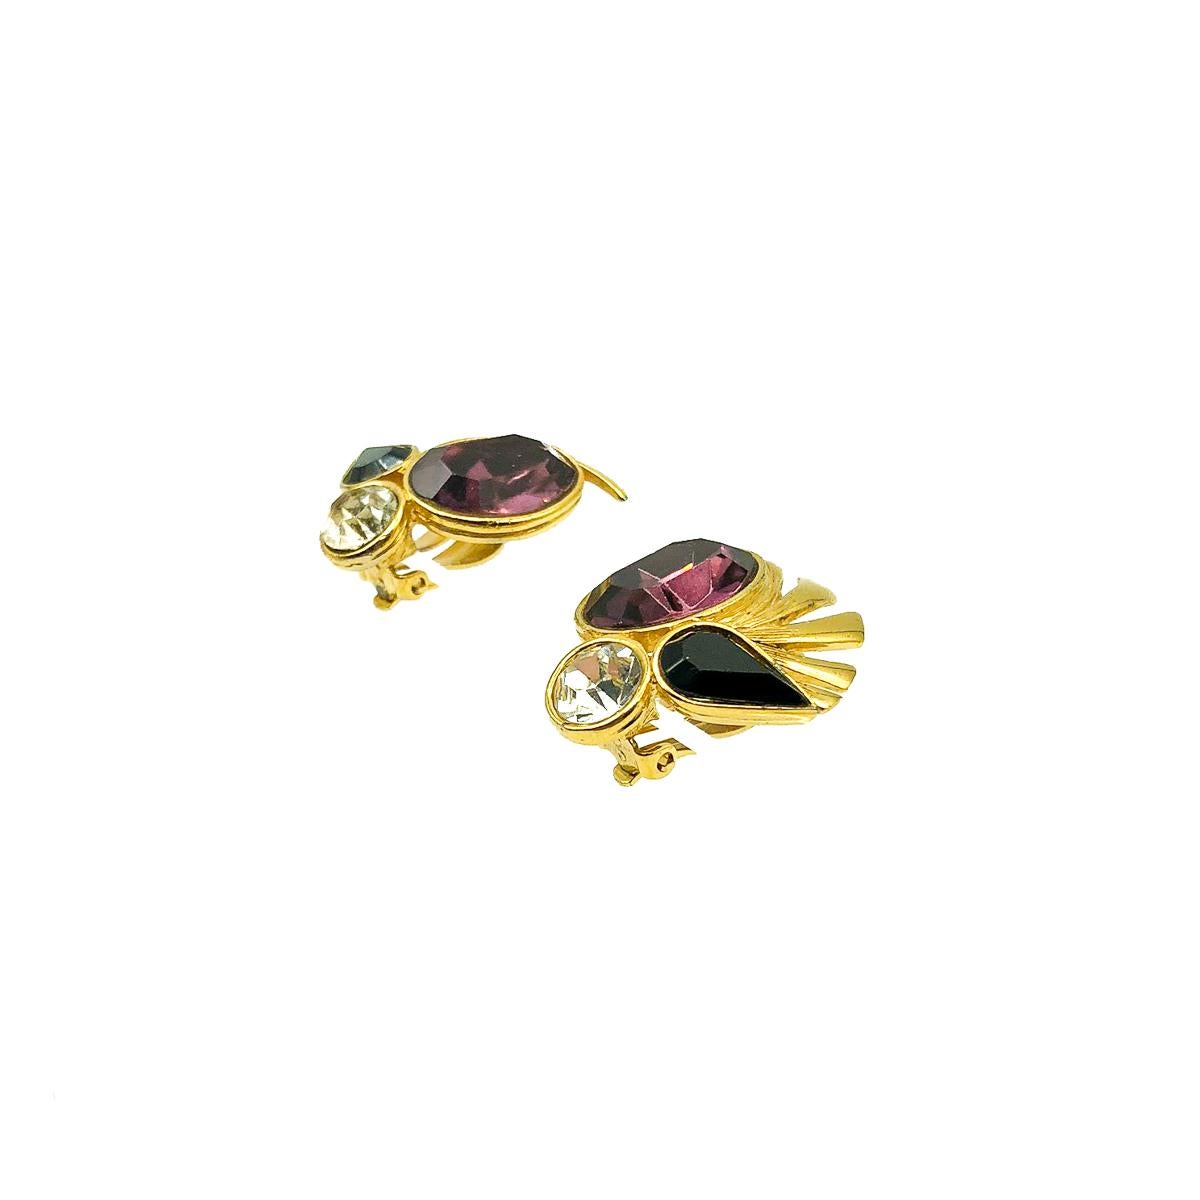 Beautiful Vintage Givenchy Amethyst Earrings. Featuring a large faceted amethyst oval crystal with contrasting black and clear fancy cut crystals with feather style detailing for an extra style shot. In gold plated metal. 3.2cms. In very good